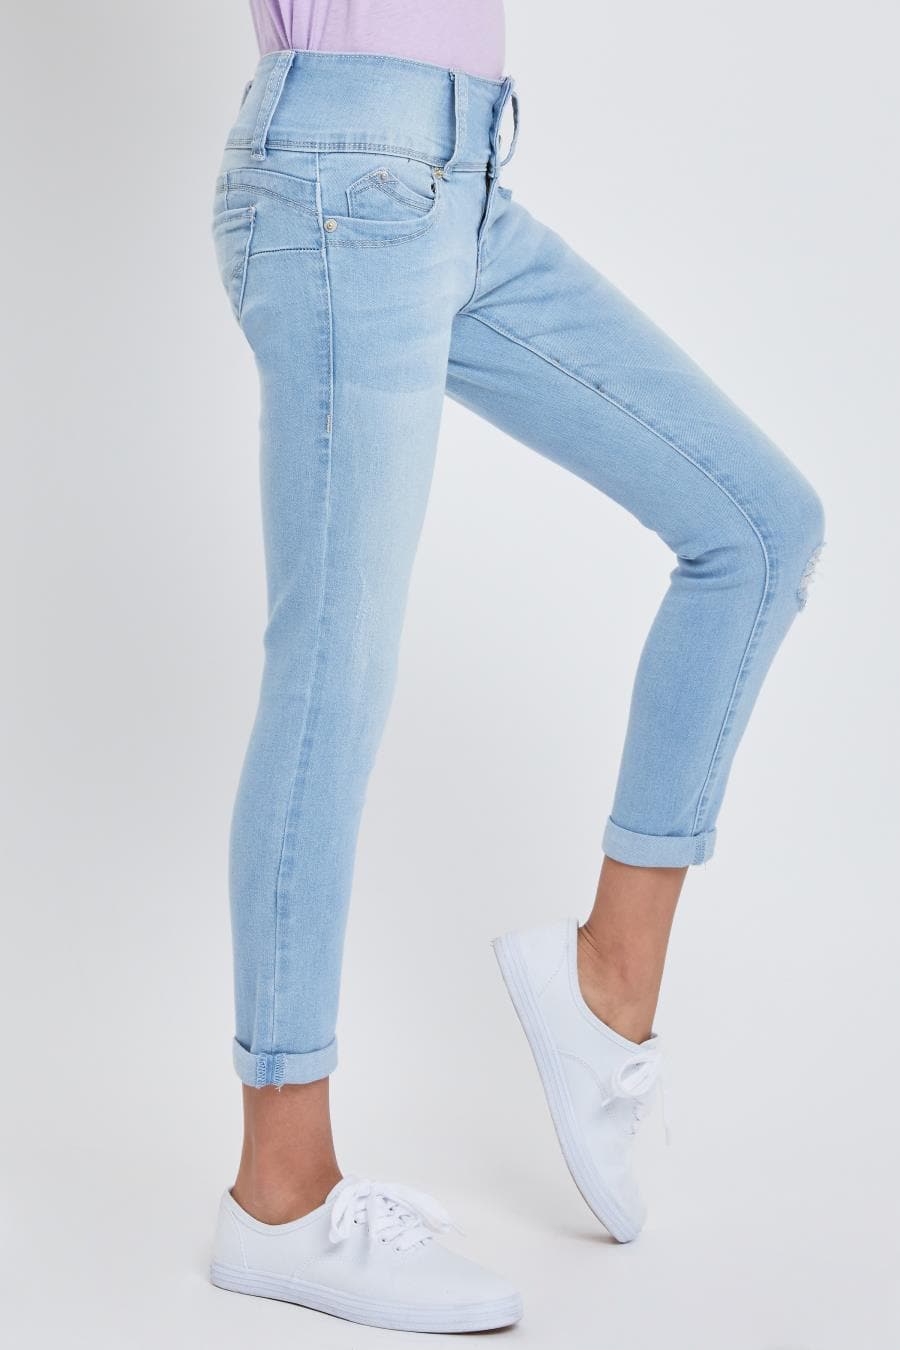 Girls 3 Button Skinny Jeans